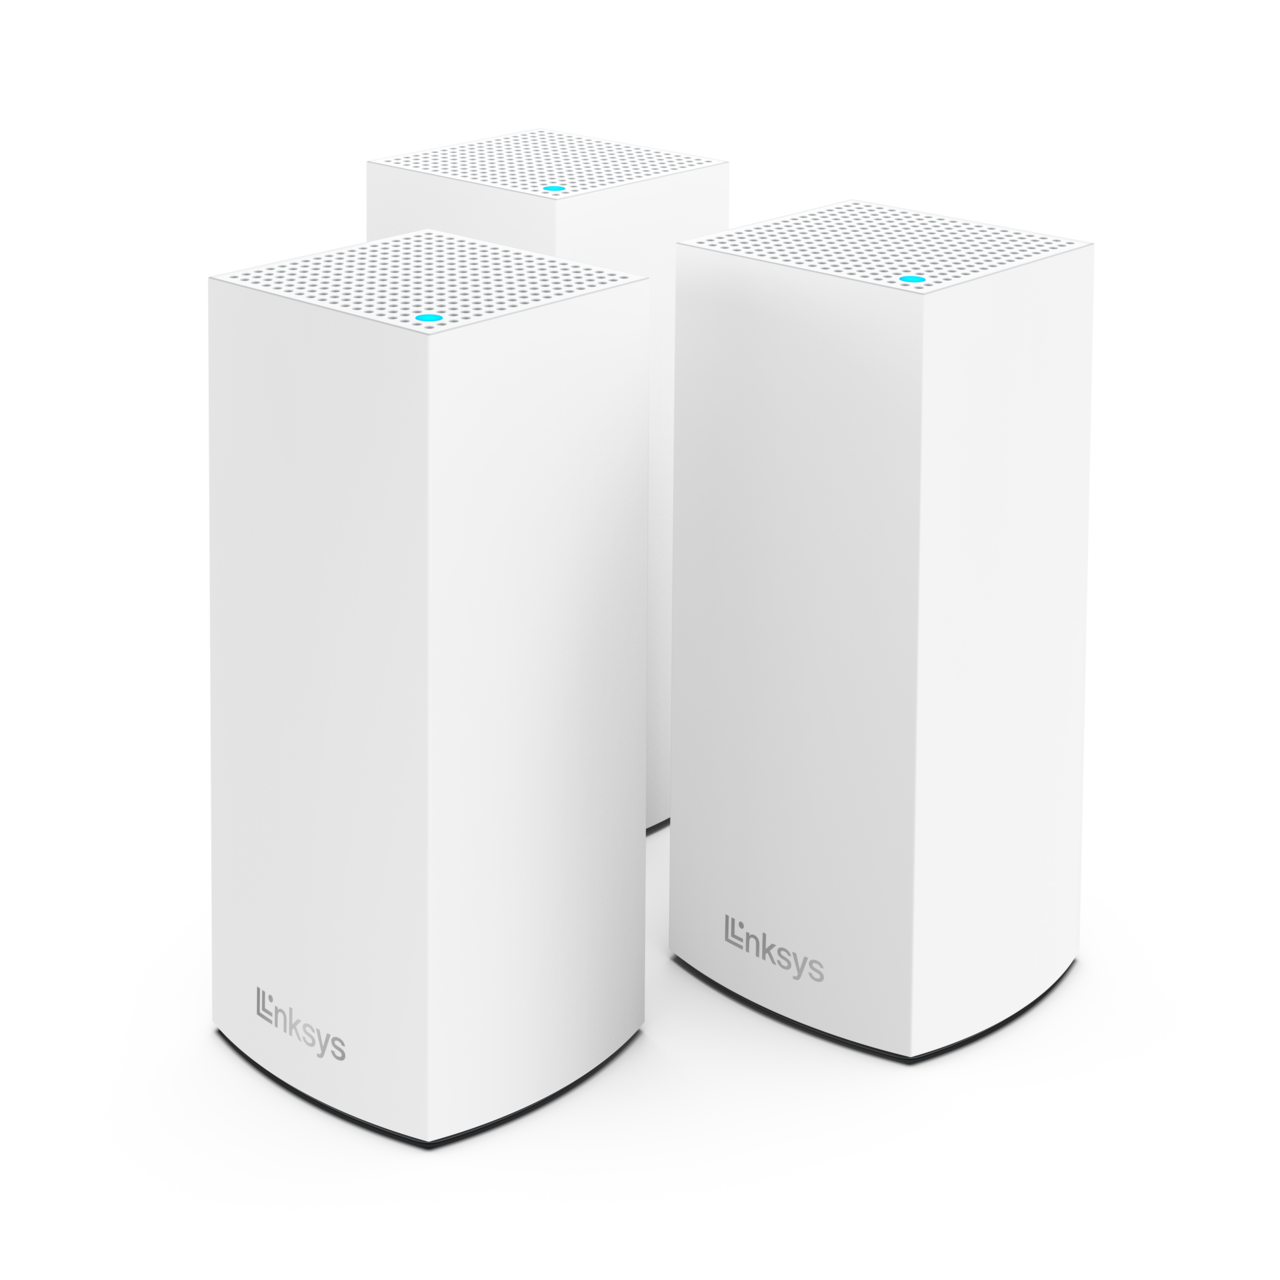 Atlas Pro 6 Dual-Band Mesh WiFi 6 Router System (AX5400) | Linksys